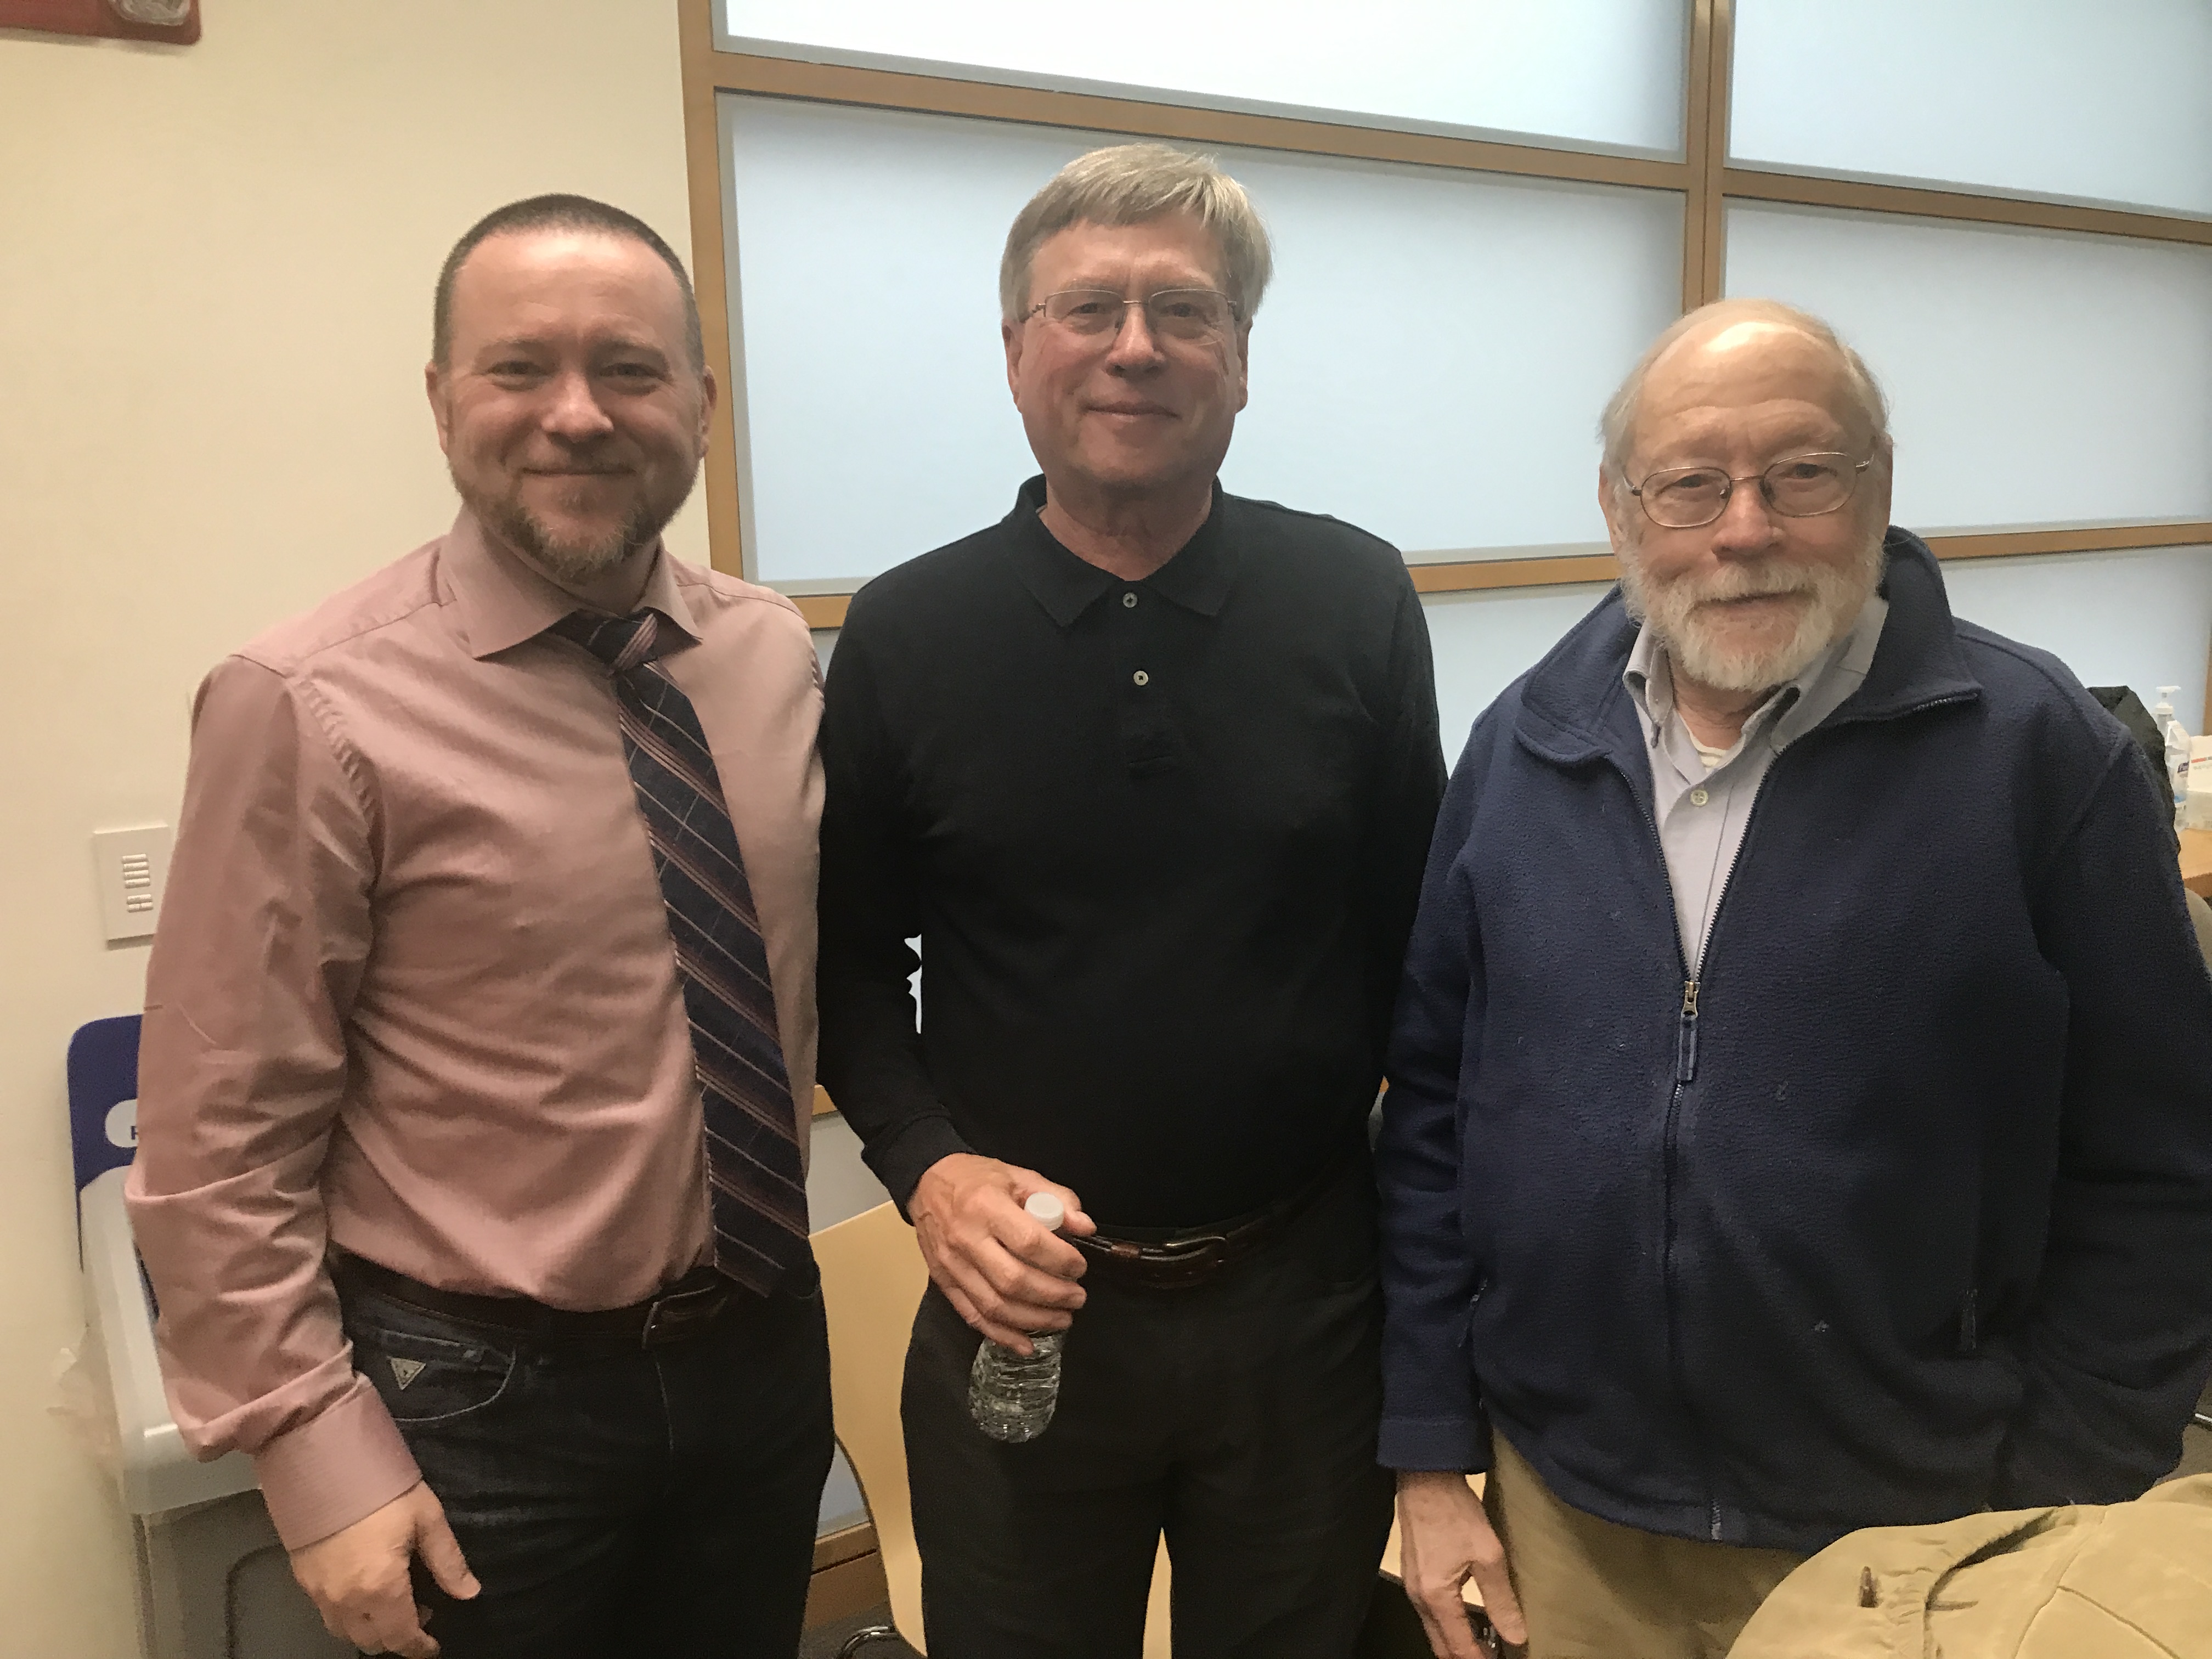 Dr Hayes (left) with Robert Marks and Donald Worster